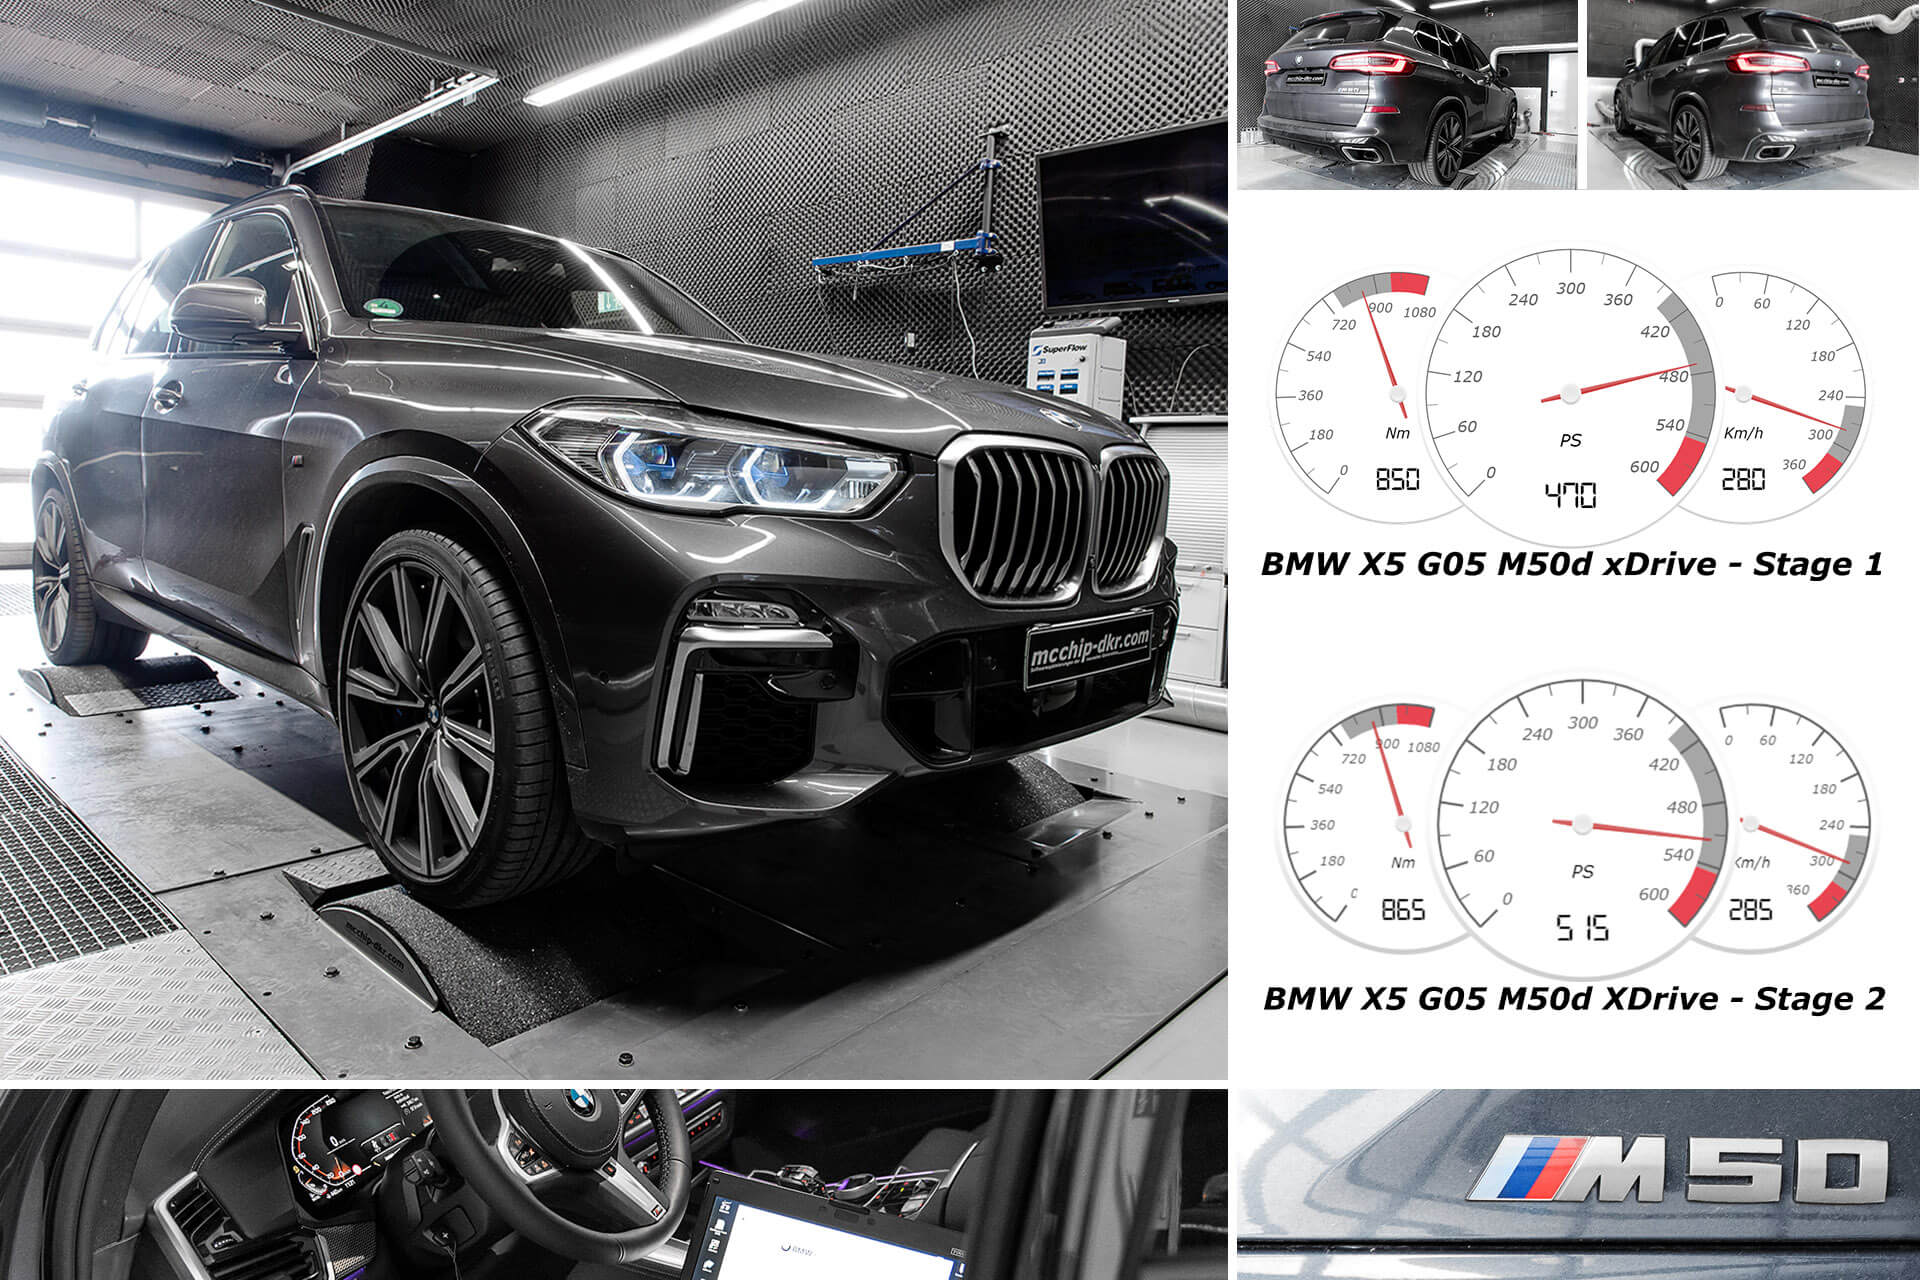 Chiptuning BMW X5 M50d xDrive G05 Stage 1-2